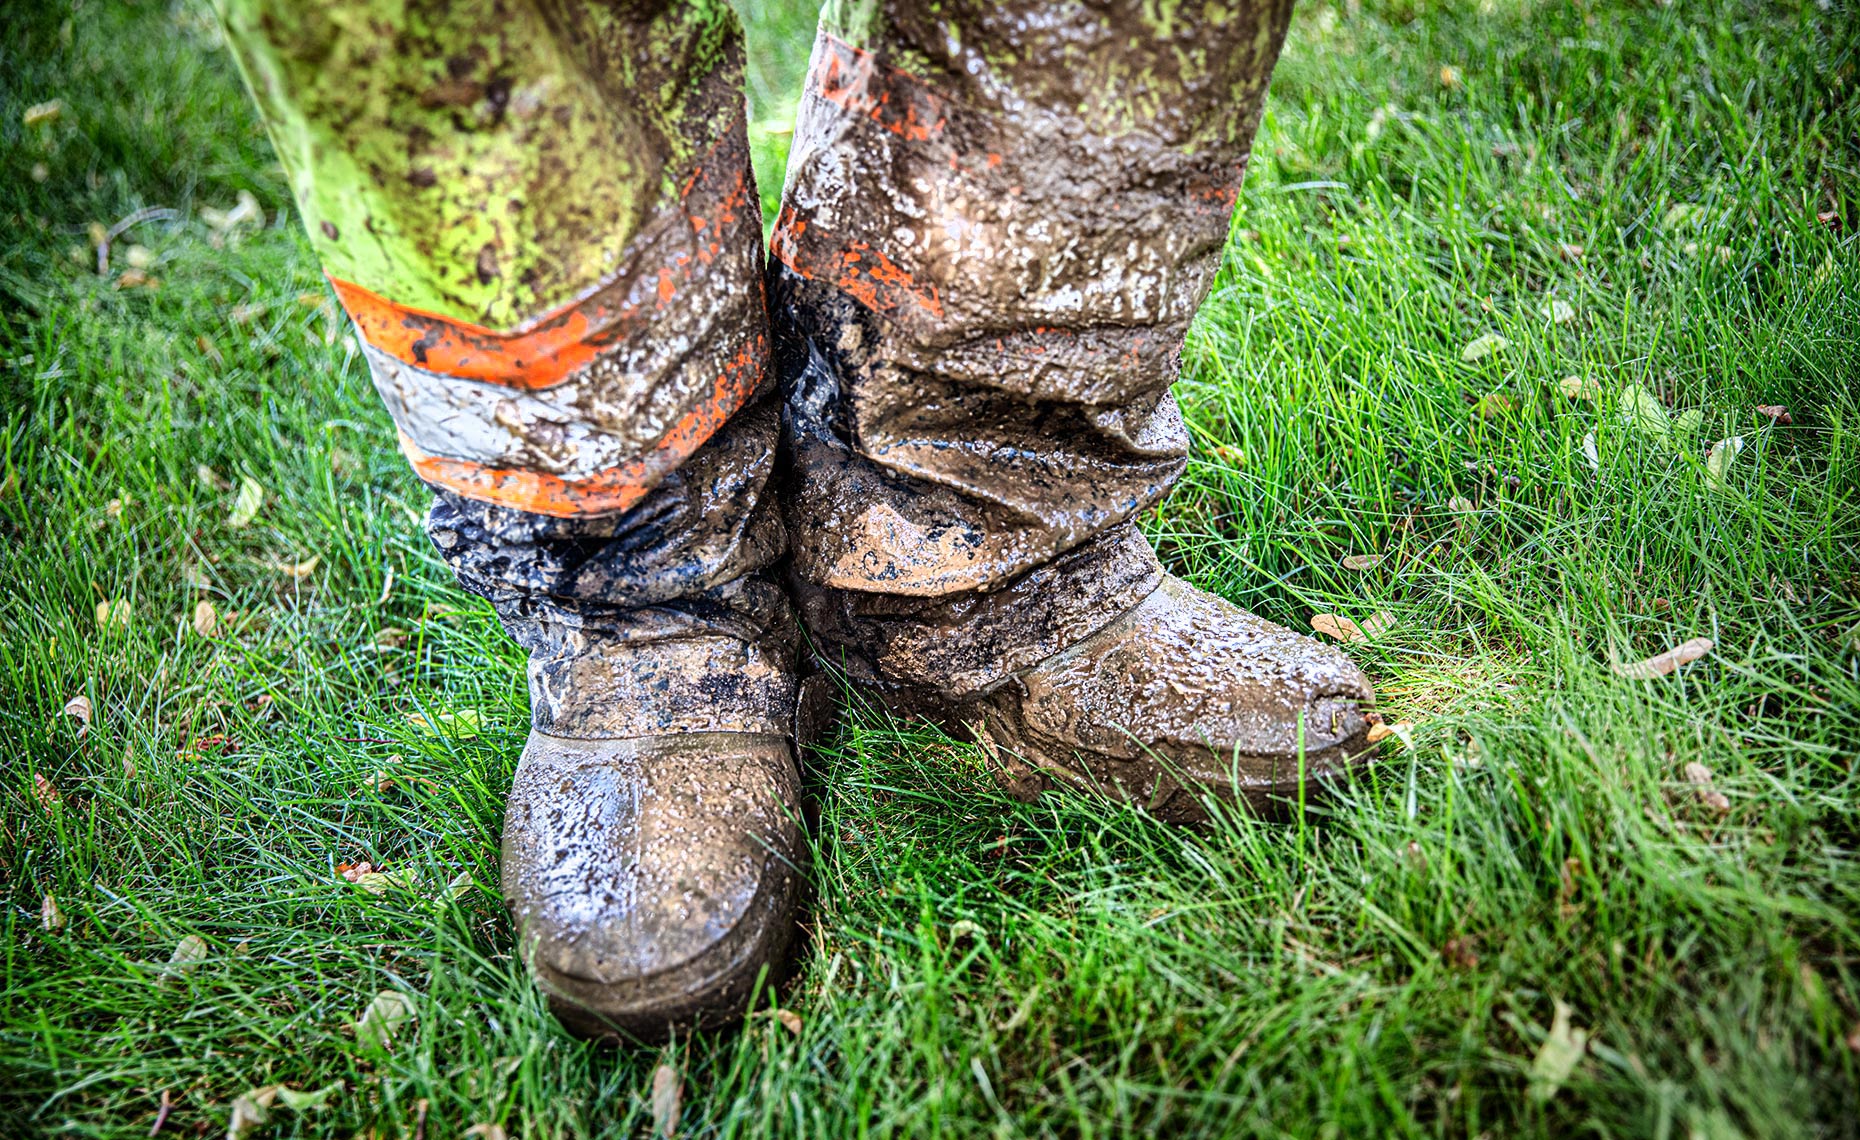 a toronto construction worker shows off his muddy boots to a photographer 